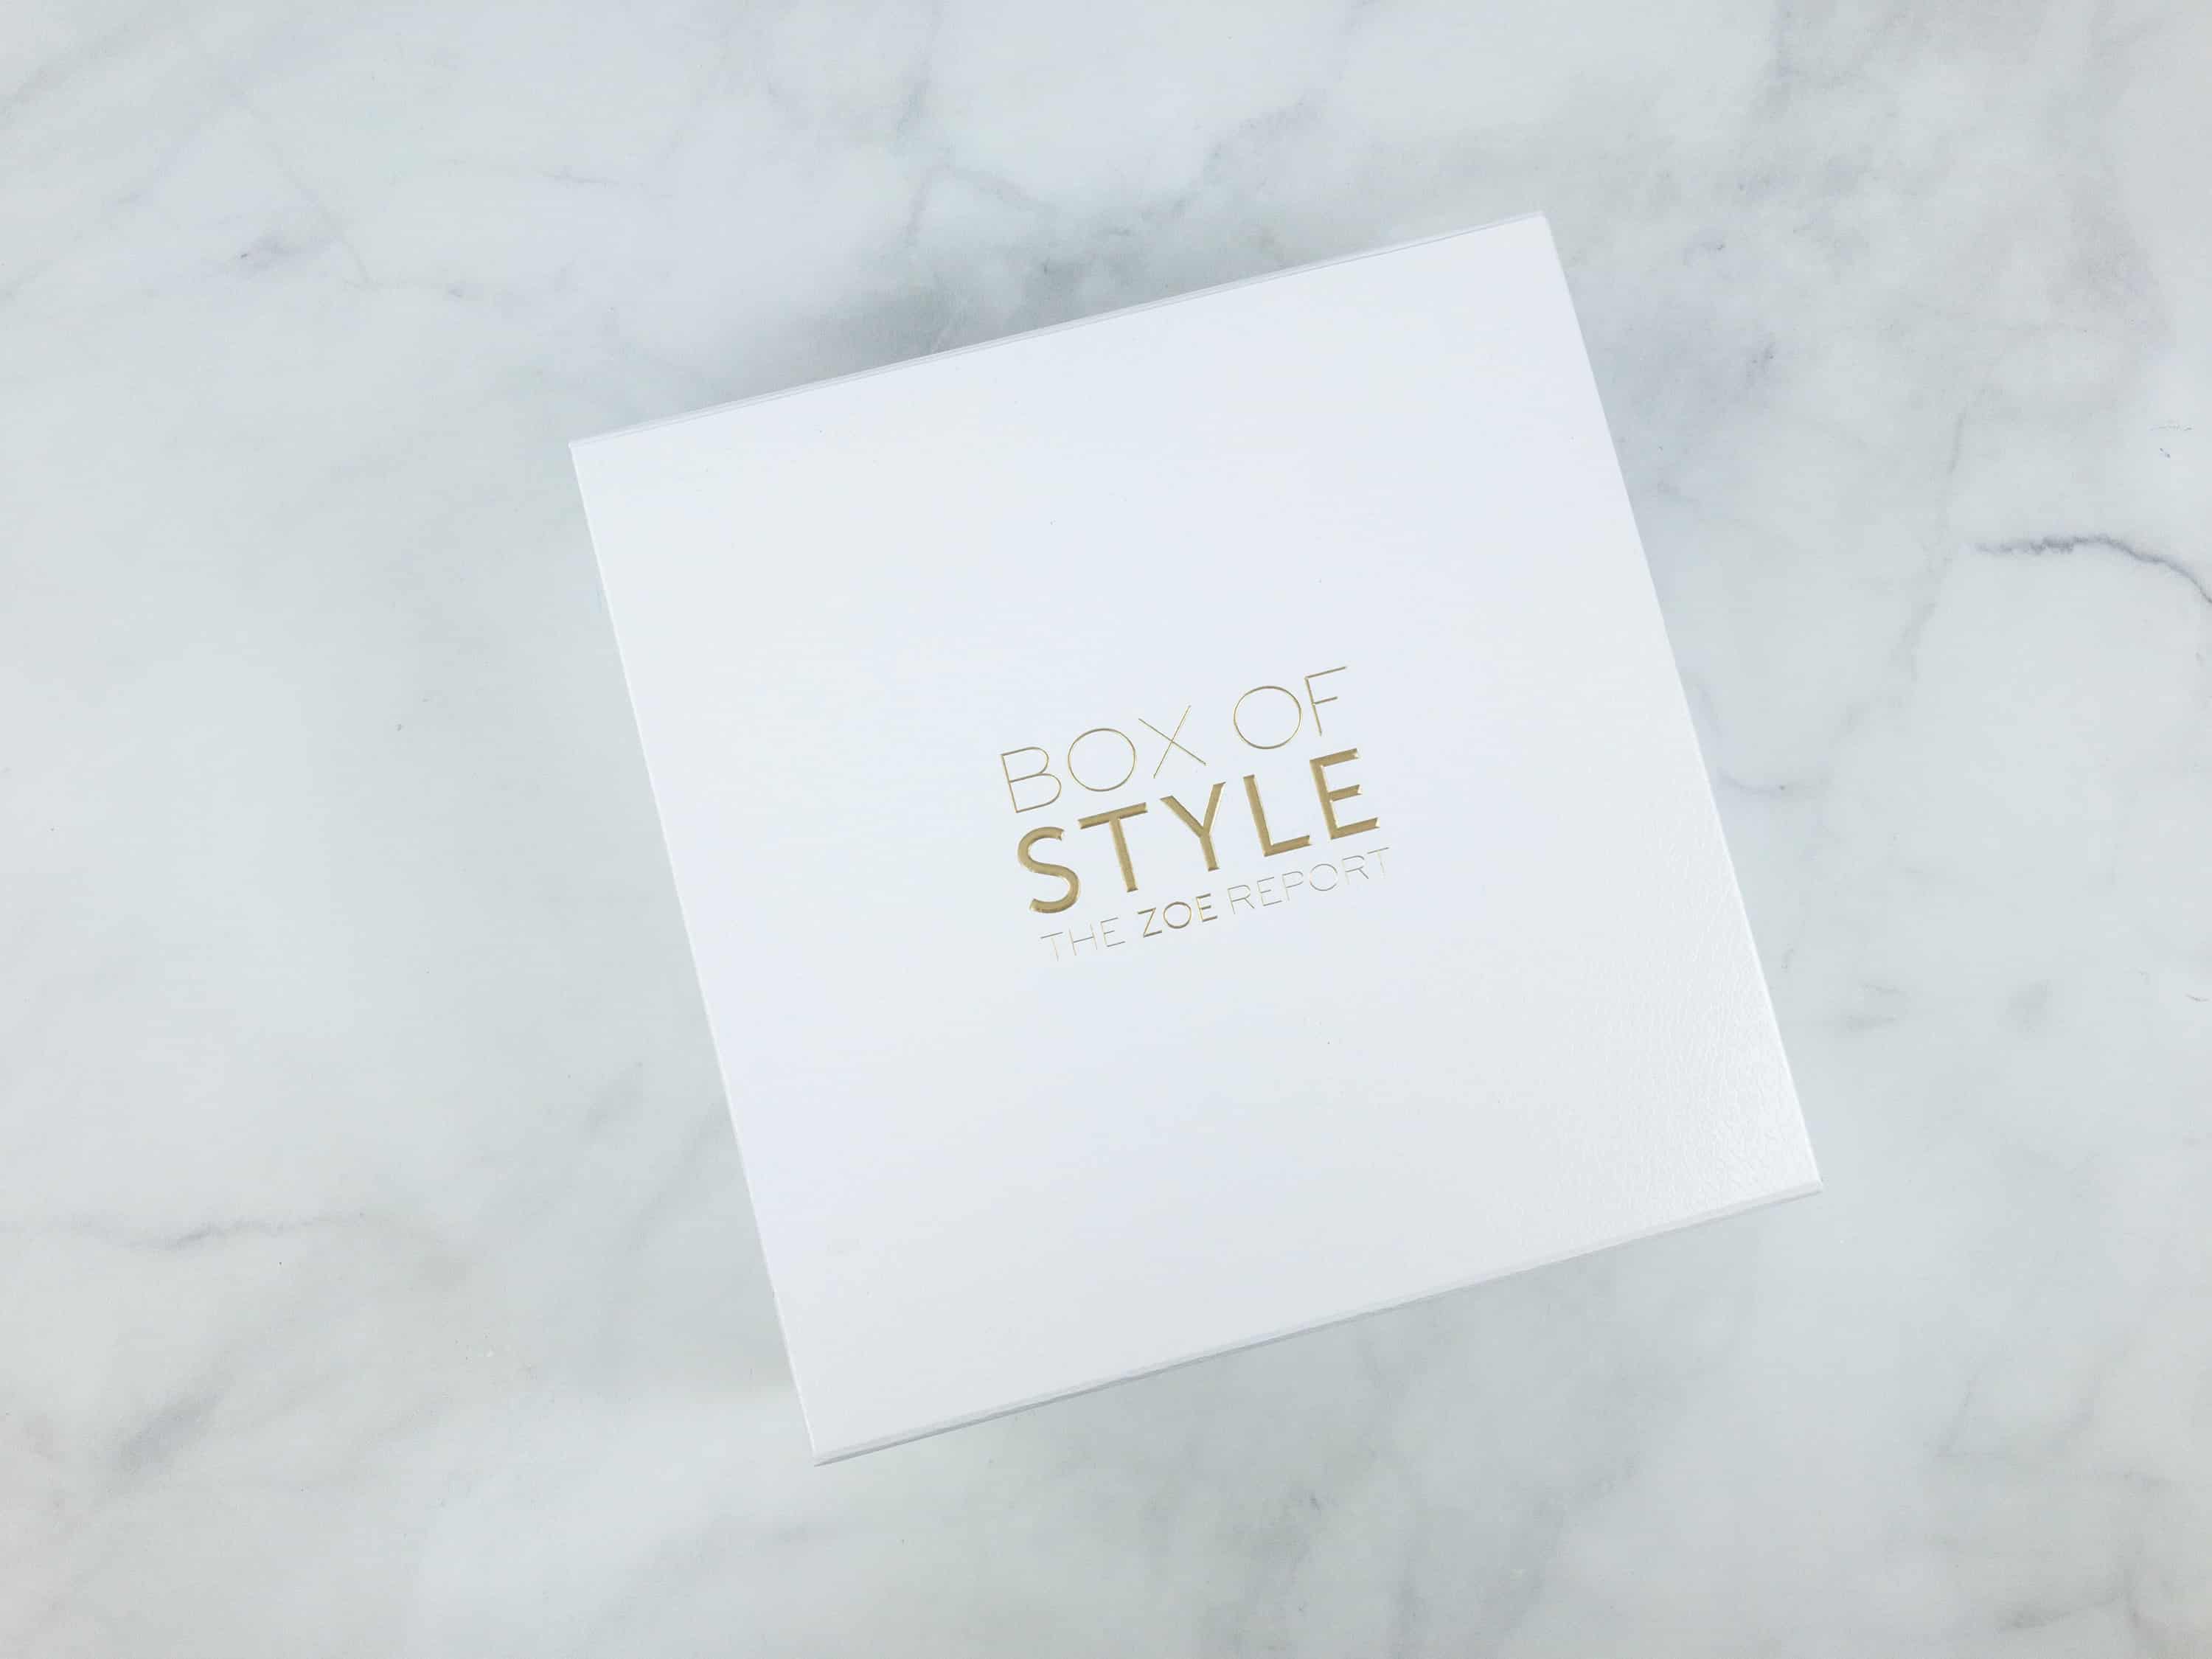 Rachel Zoe's CURATEUR Box Is Your One-Stop Shop For Fashion & Beauty Items